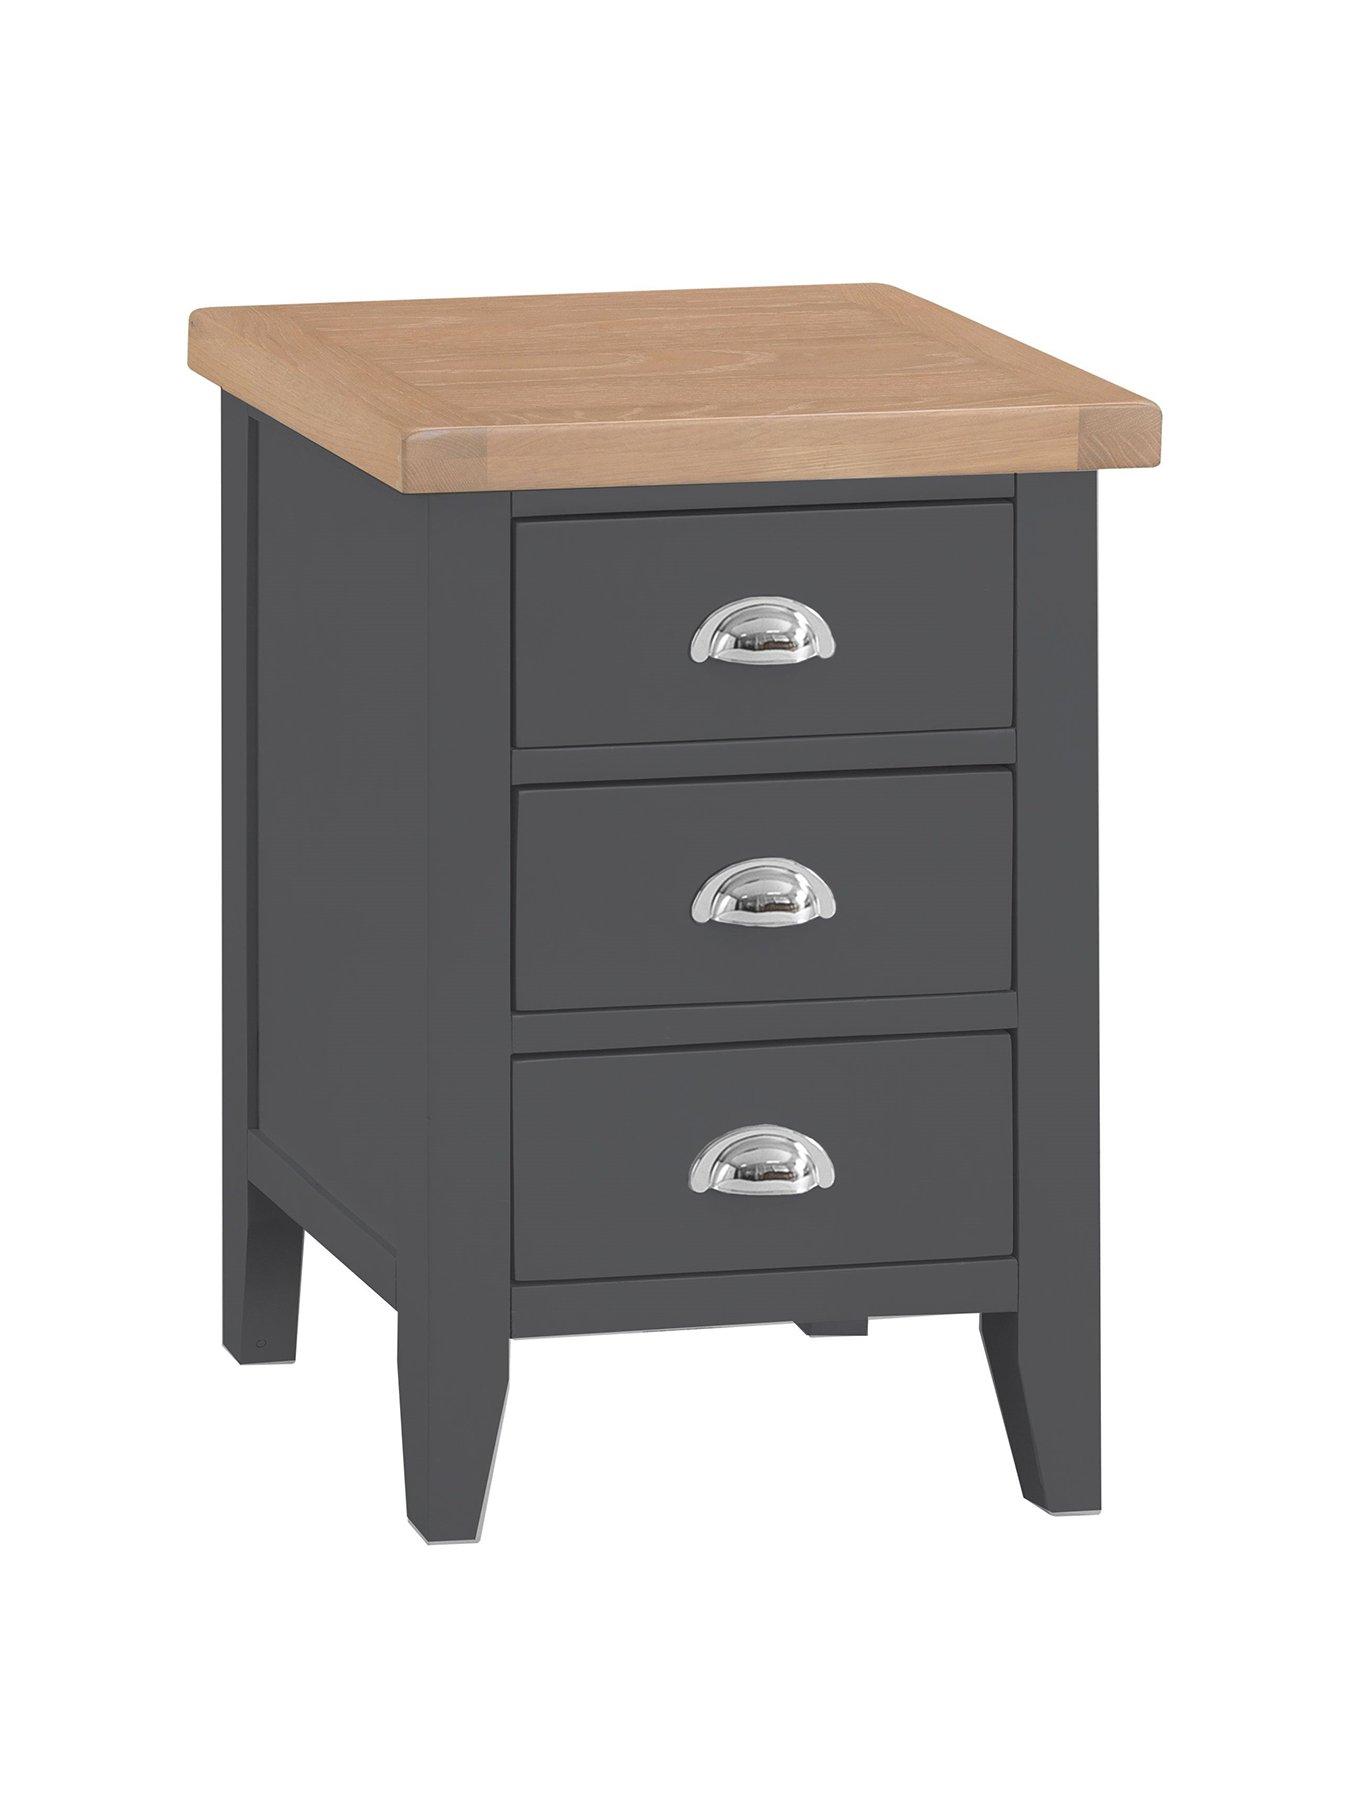 1 Drawer Fuss-free Assembly Contemporary Design Simba Oak Bedside Table 58 x 43 x 40 cm